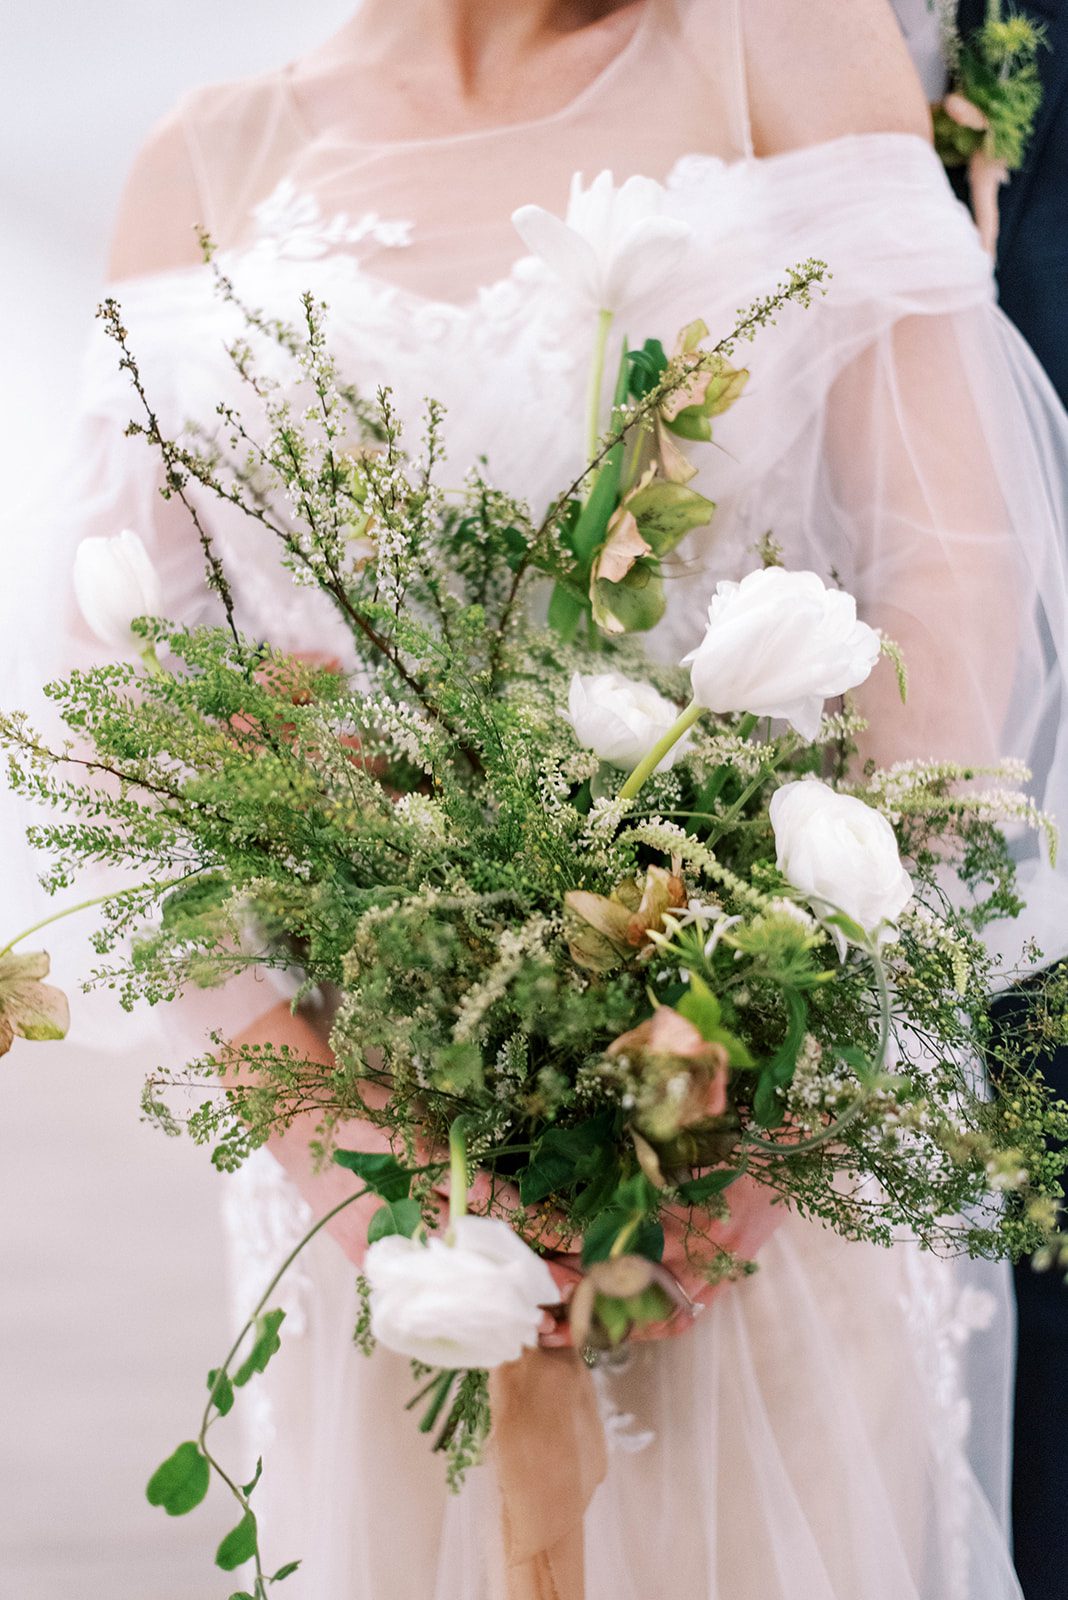 bridal bouquet in central Florida for a beach wedding, bouquet ismostly greenery with pops of white roses